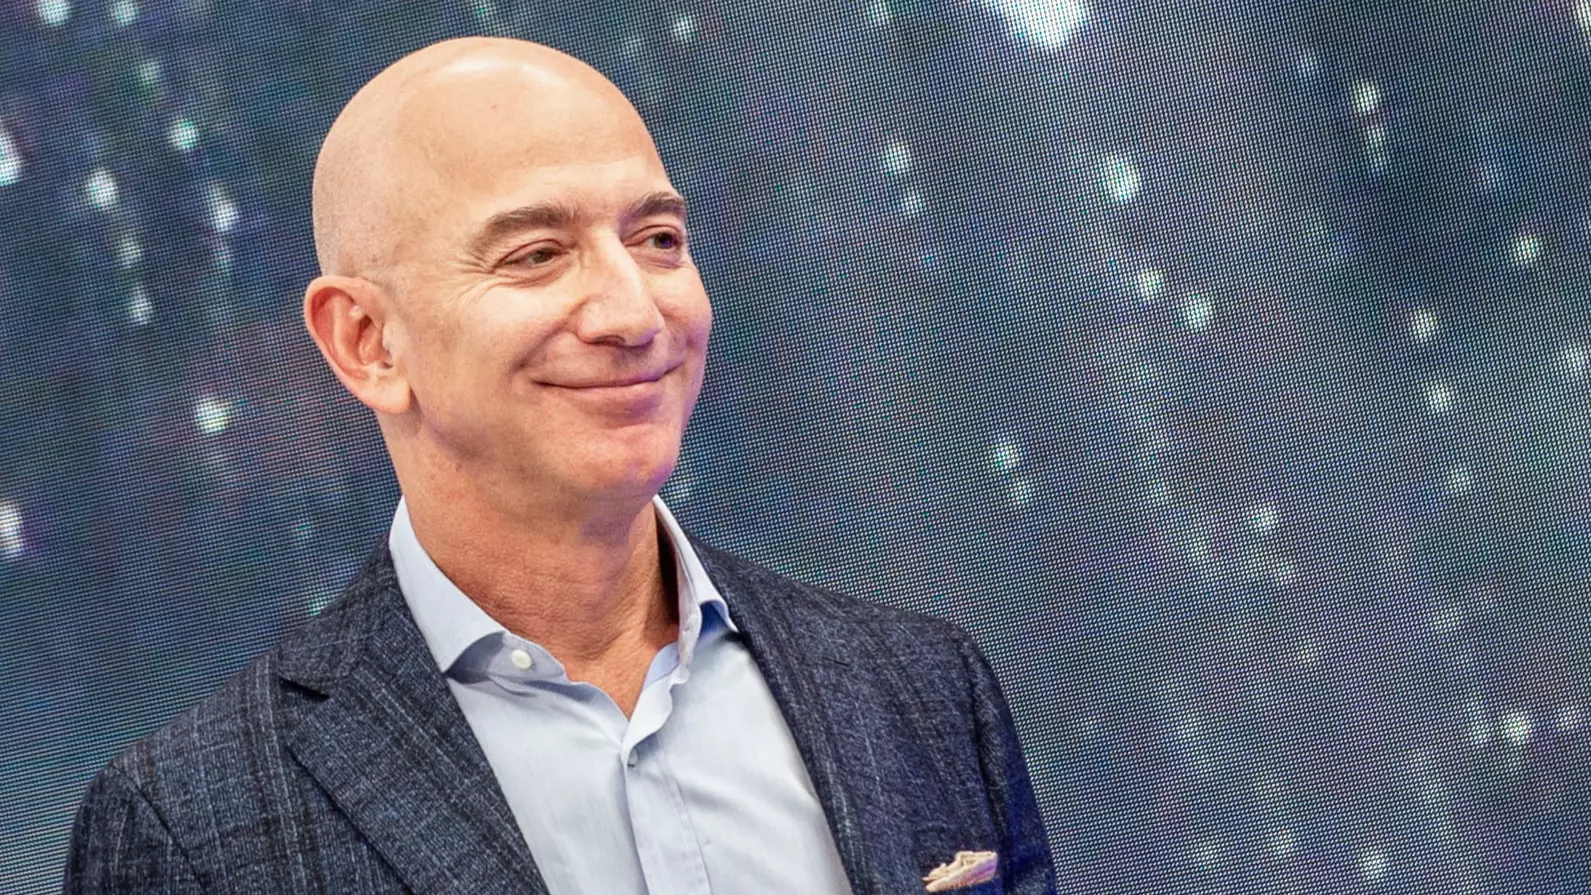 Amazon Boss Jeff Bezos Becomes The Richest Person In The History Of Forbes' Rich List